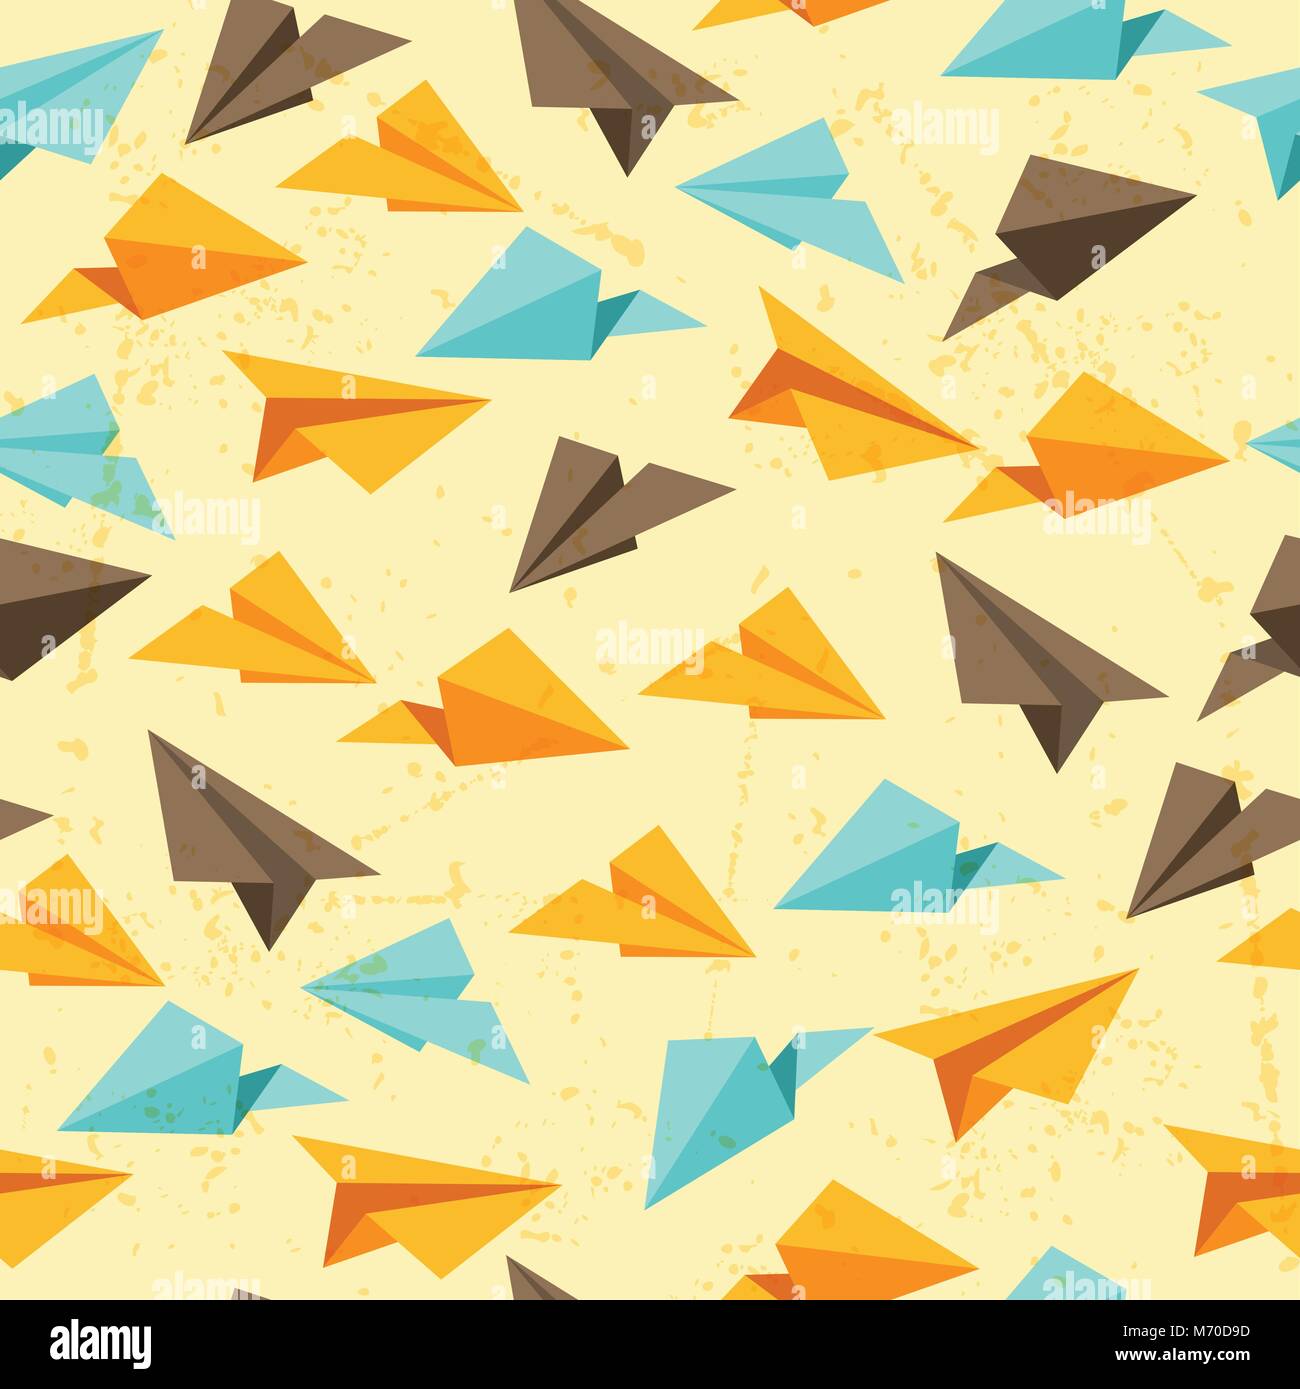 Seamless pattern of paper planes in flat design style Stock Vector